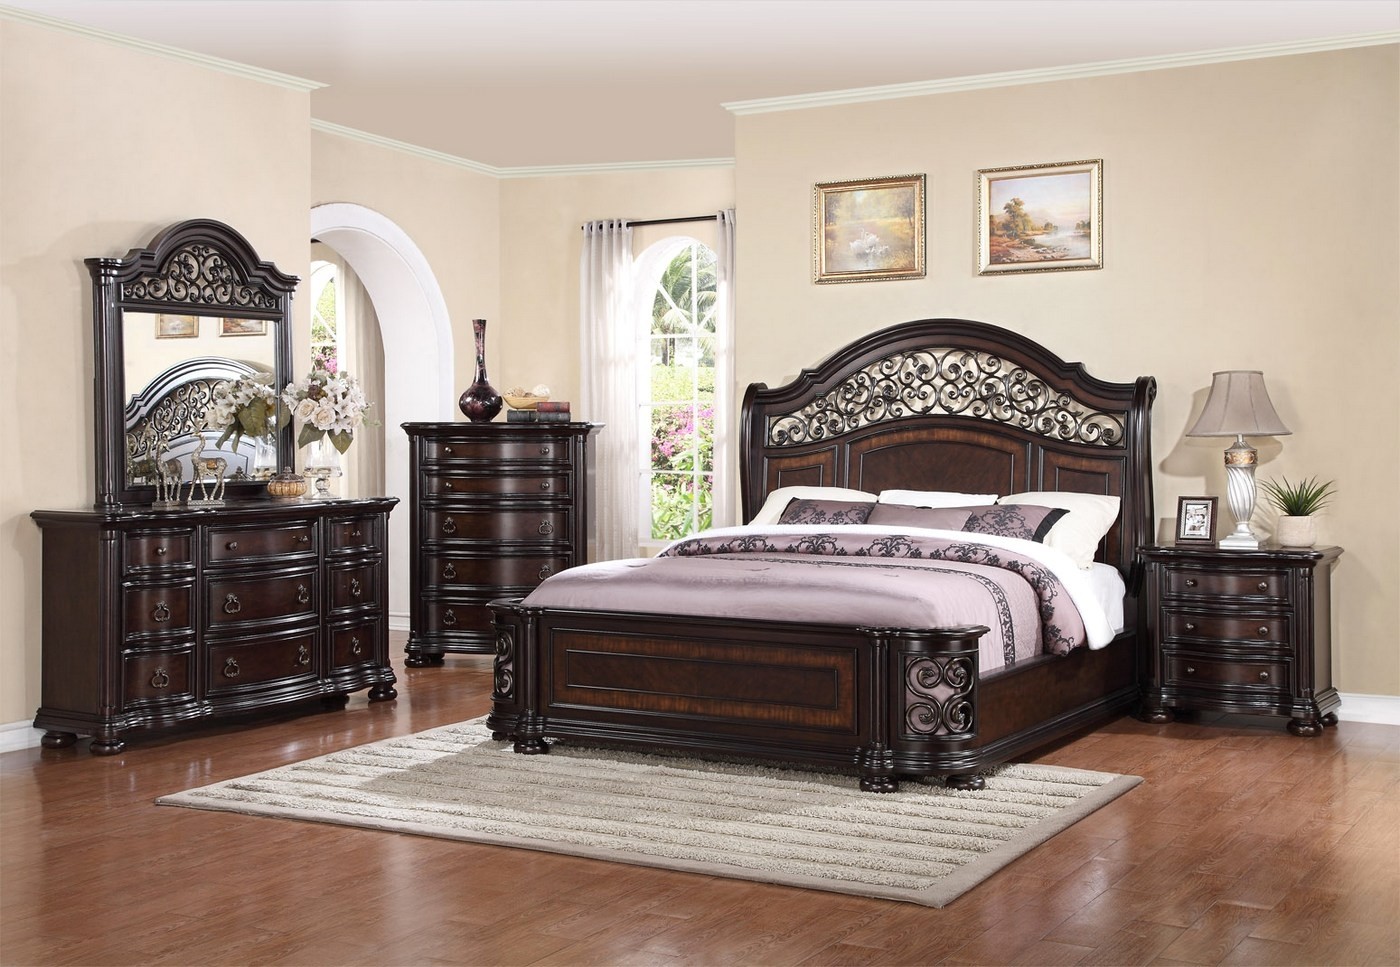 wood and iron mountain bedroom furniture